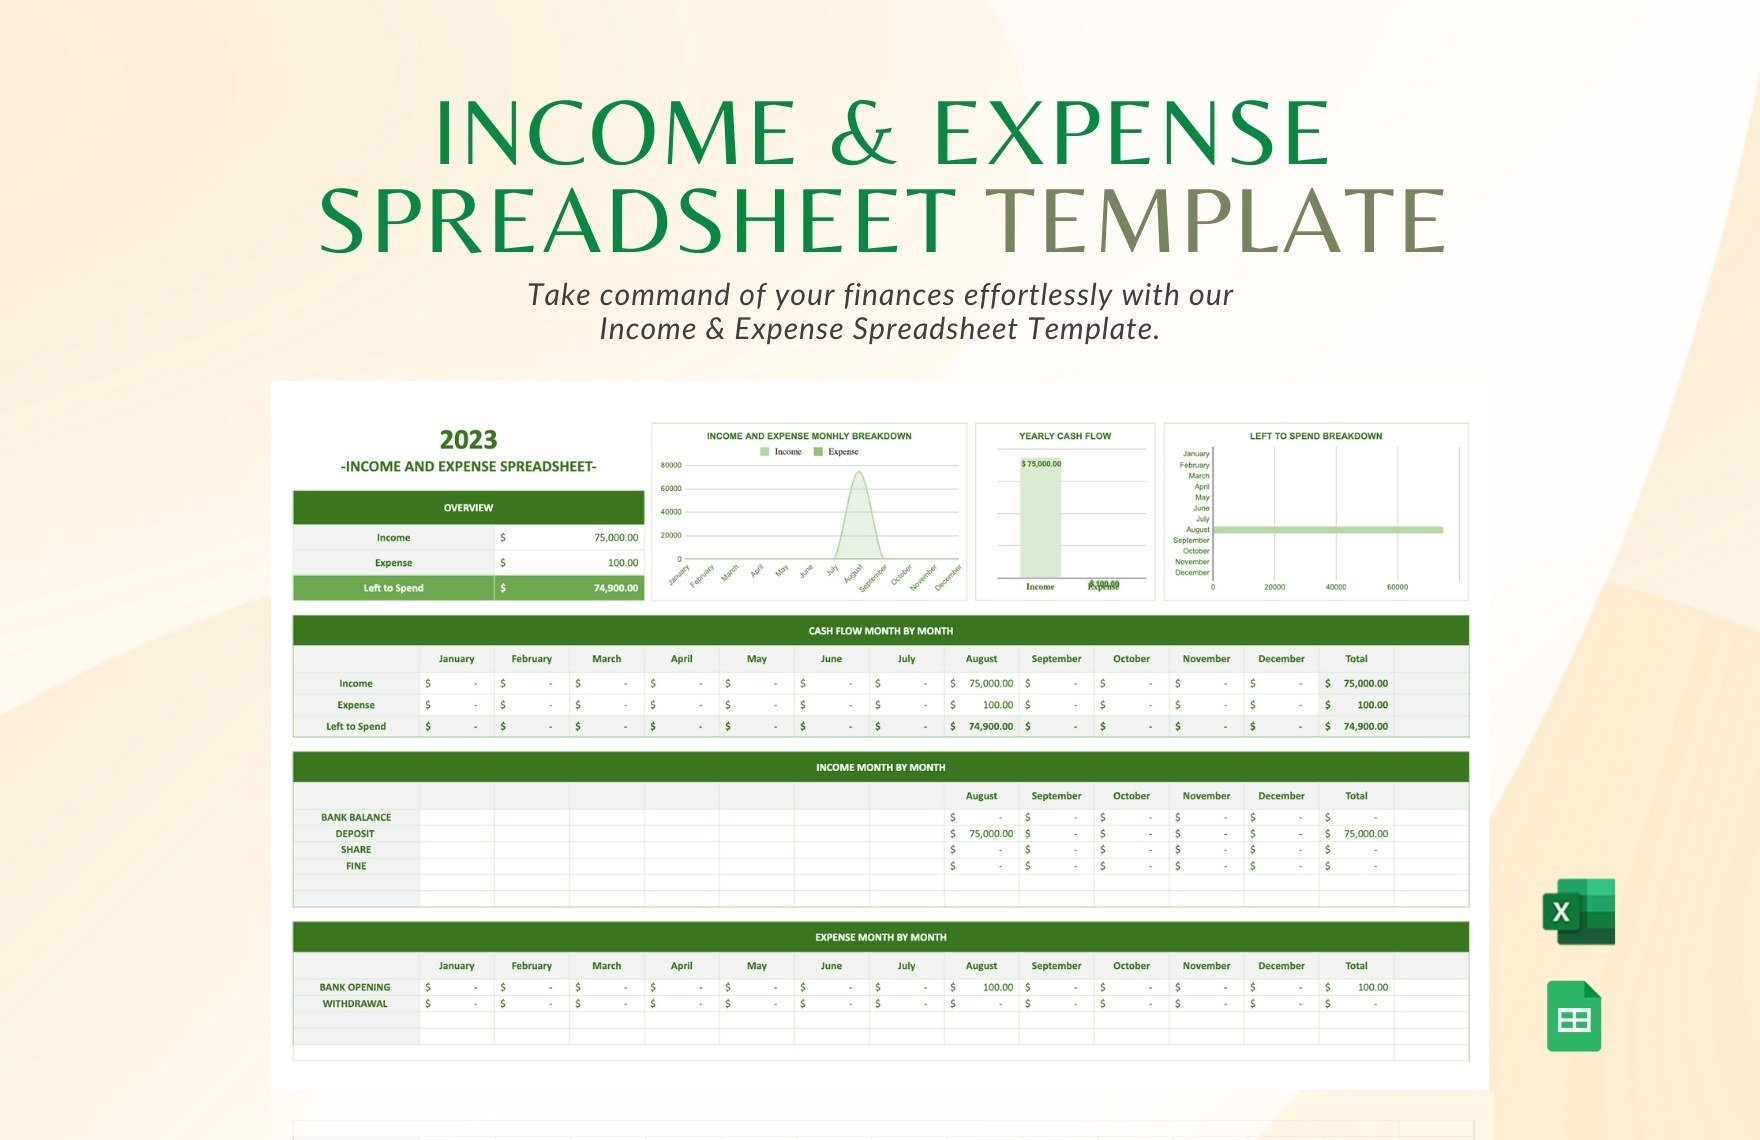 Free Income & Expense Spreadsheet in Excel, Google Sheets